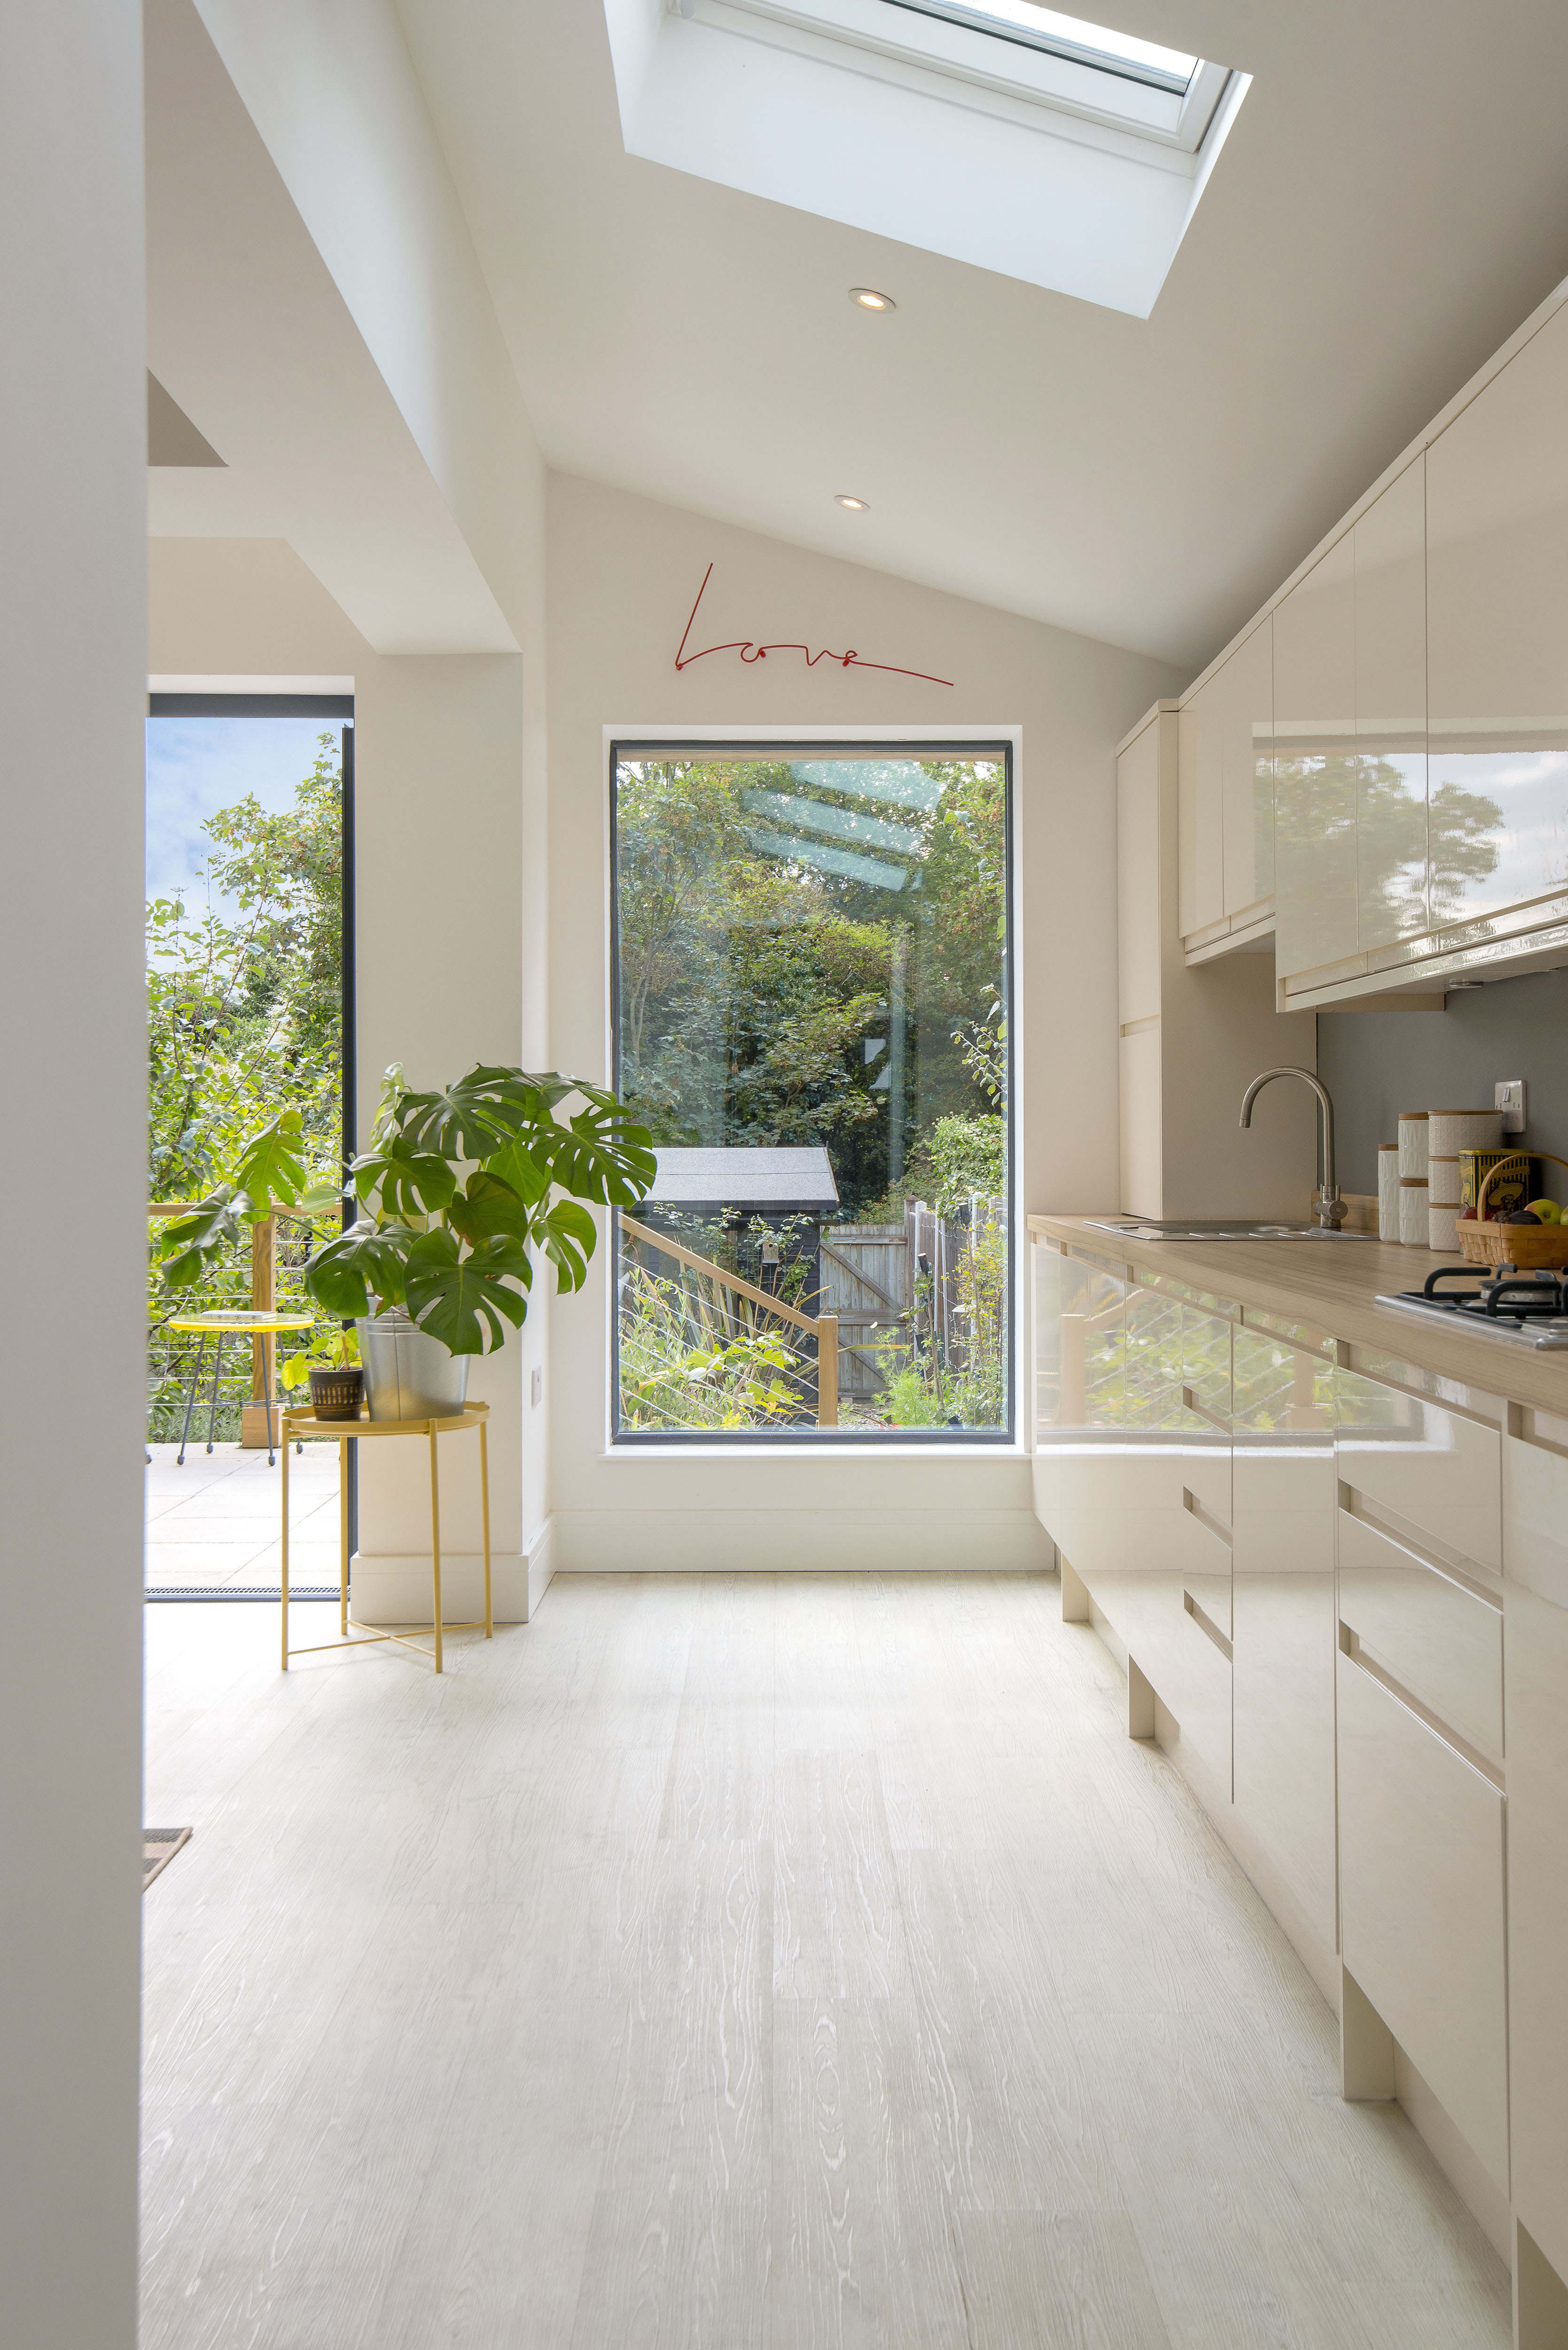 </p> <p>Find your ideal home design pro on designfor-me.com - get matched and see who's interested in your home project. Click image to see more inspiration from our design pros</p> <p>Design by Hugo, architect from Westminster, London</p> <p>#architecture #homedesign #modernhomes #homeinspiration #extensions #extensiondesign #extensioninspiration #extensionideas #houseextension #sideextensions #sidereturn #sideextensionideas </p> <p>